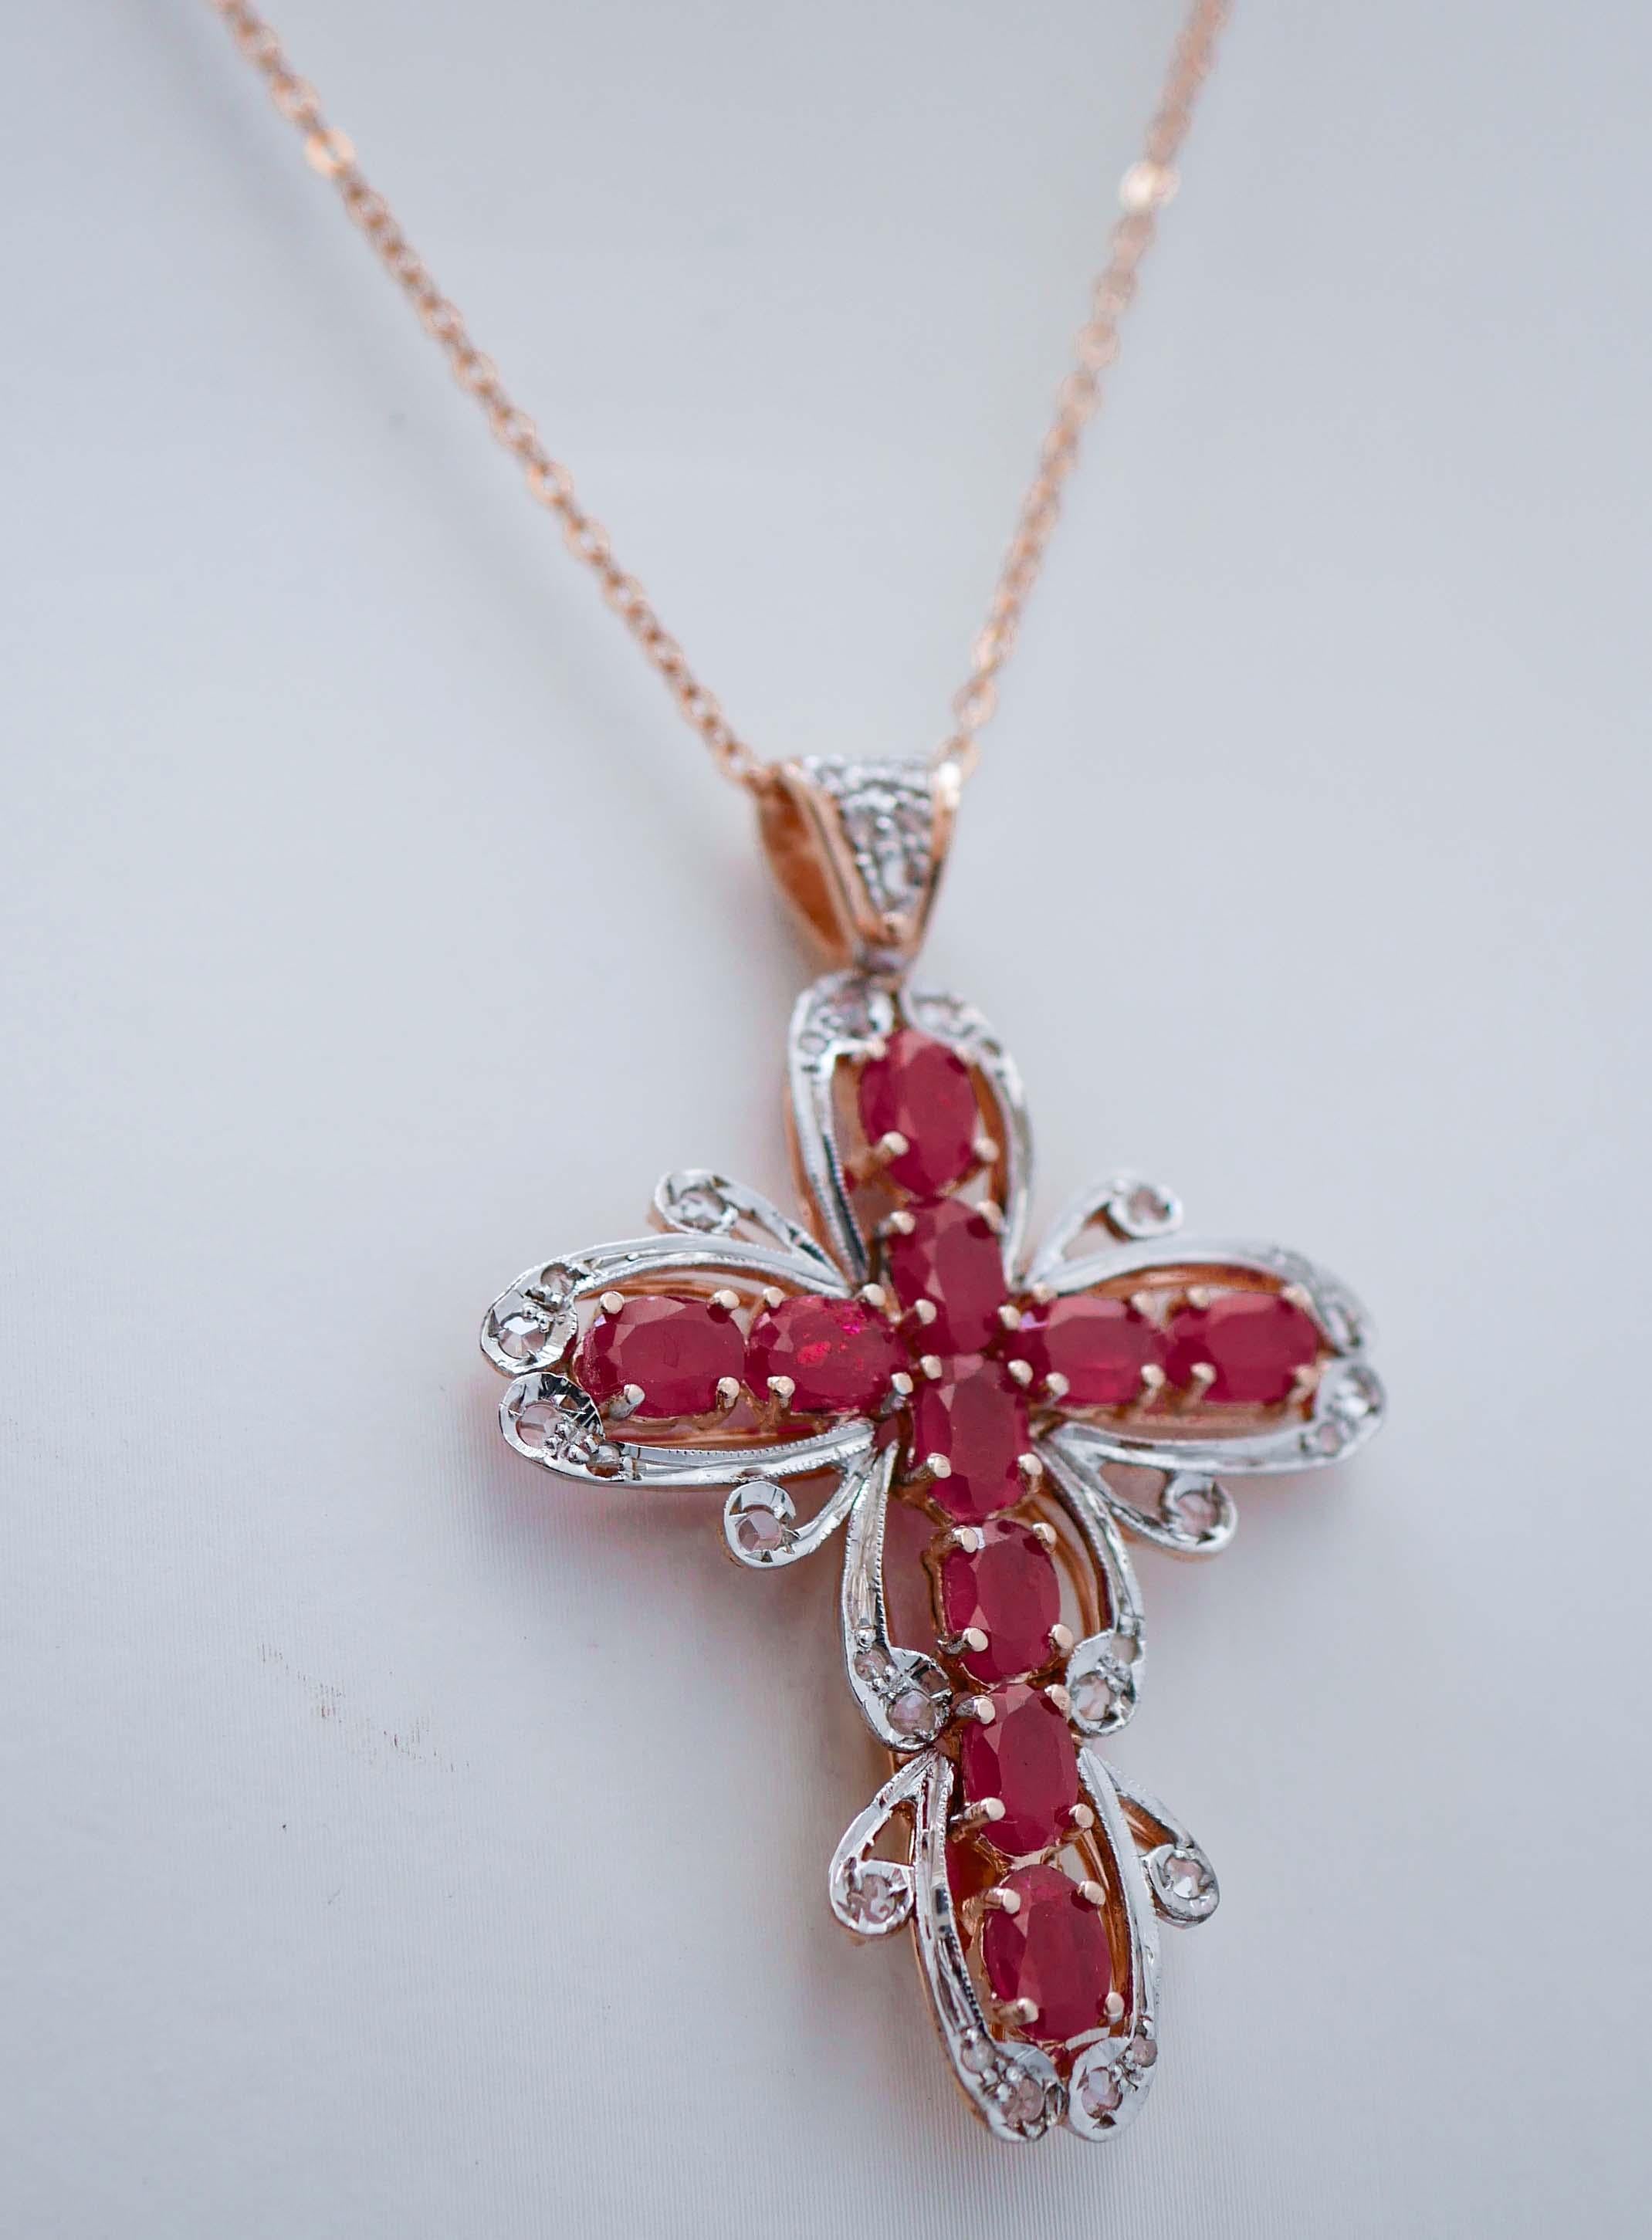 Retro Rubies, Diamonds, Rose Gold and Silver Cross Pendant Necklace. For Sale